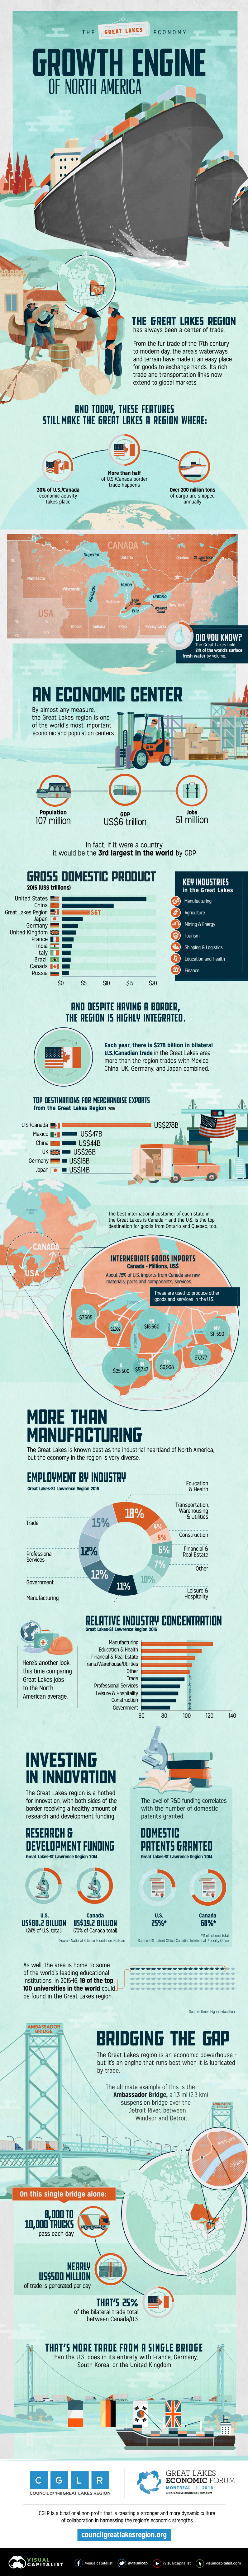 The Great Lakes Economy: The Growth Engine of North America